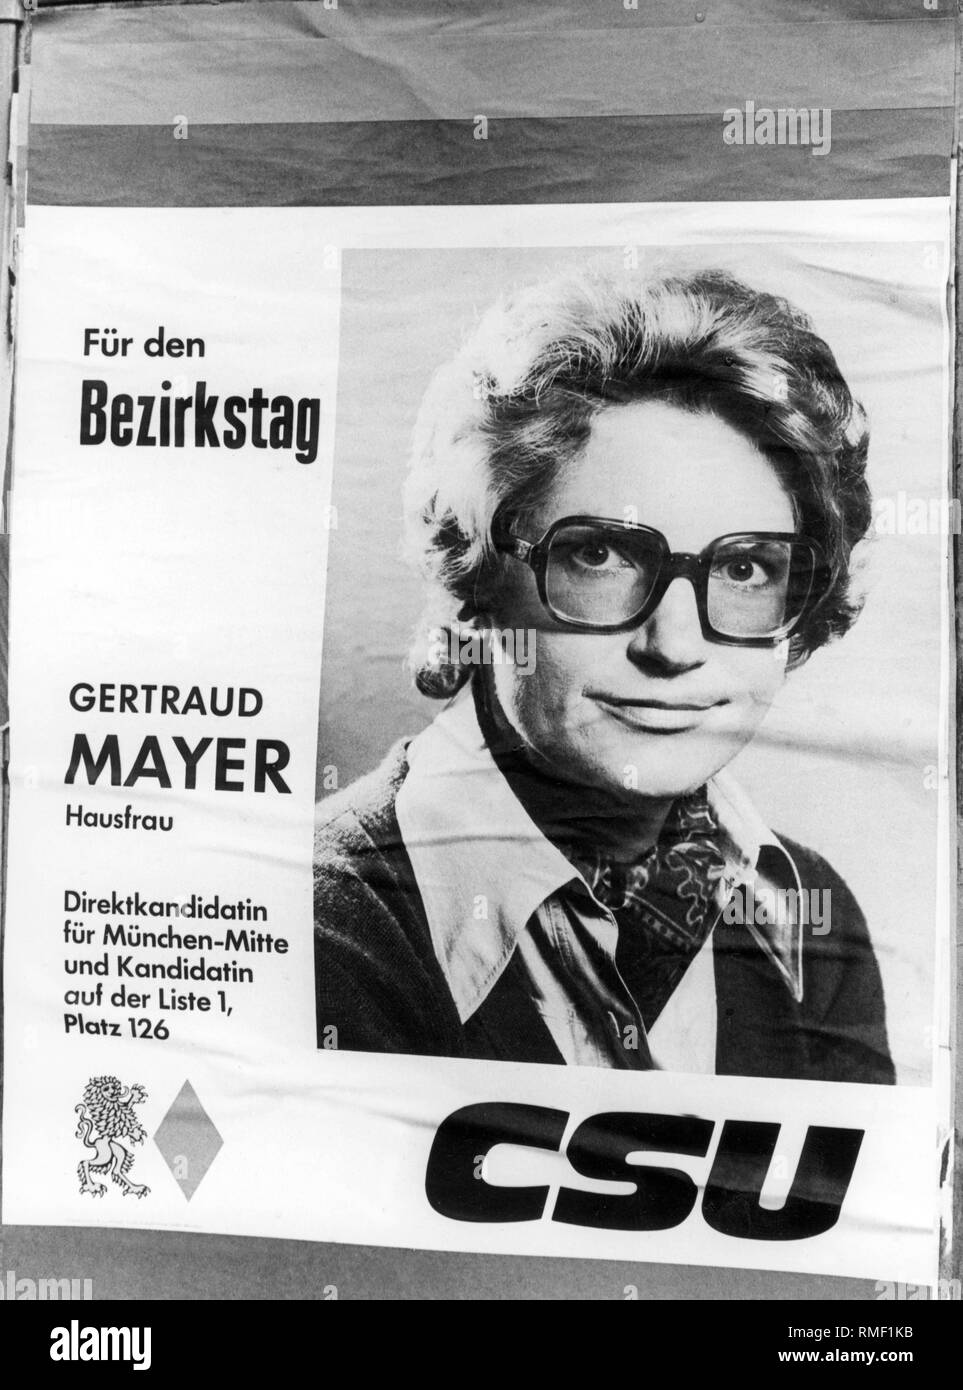 Election poster of the CSU politician Gertraud Mayer in 1974. Stock Photo